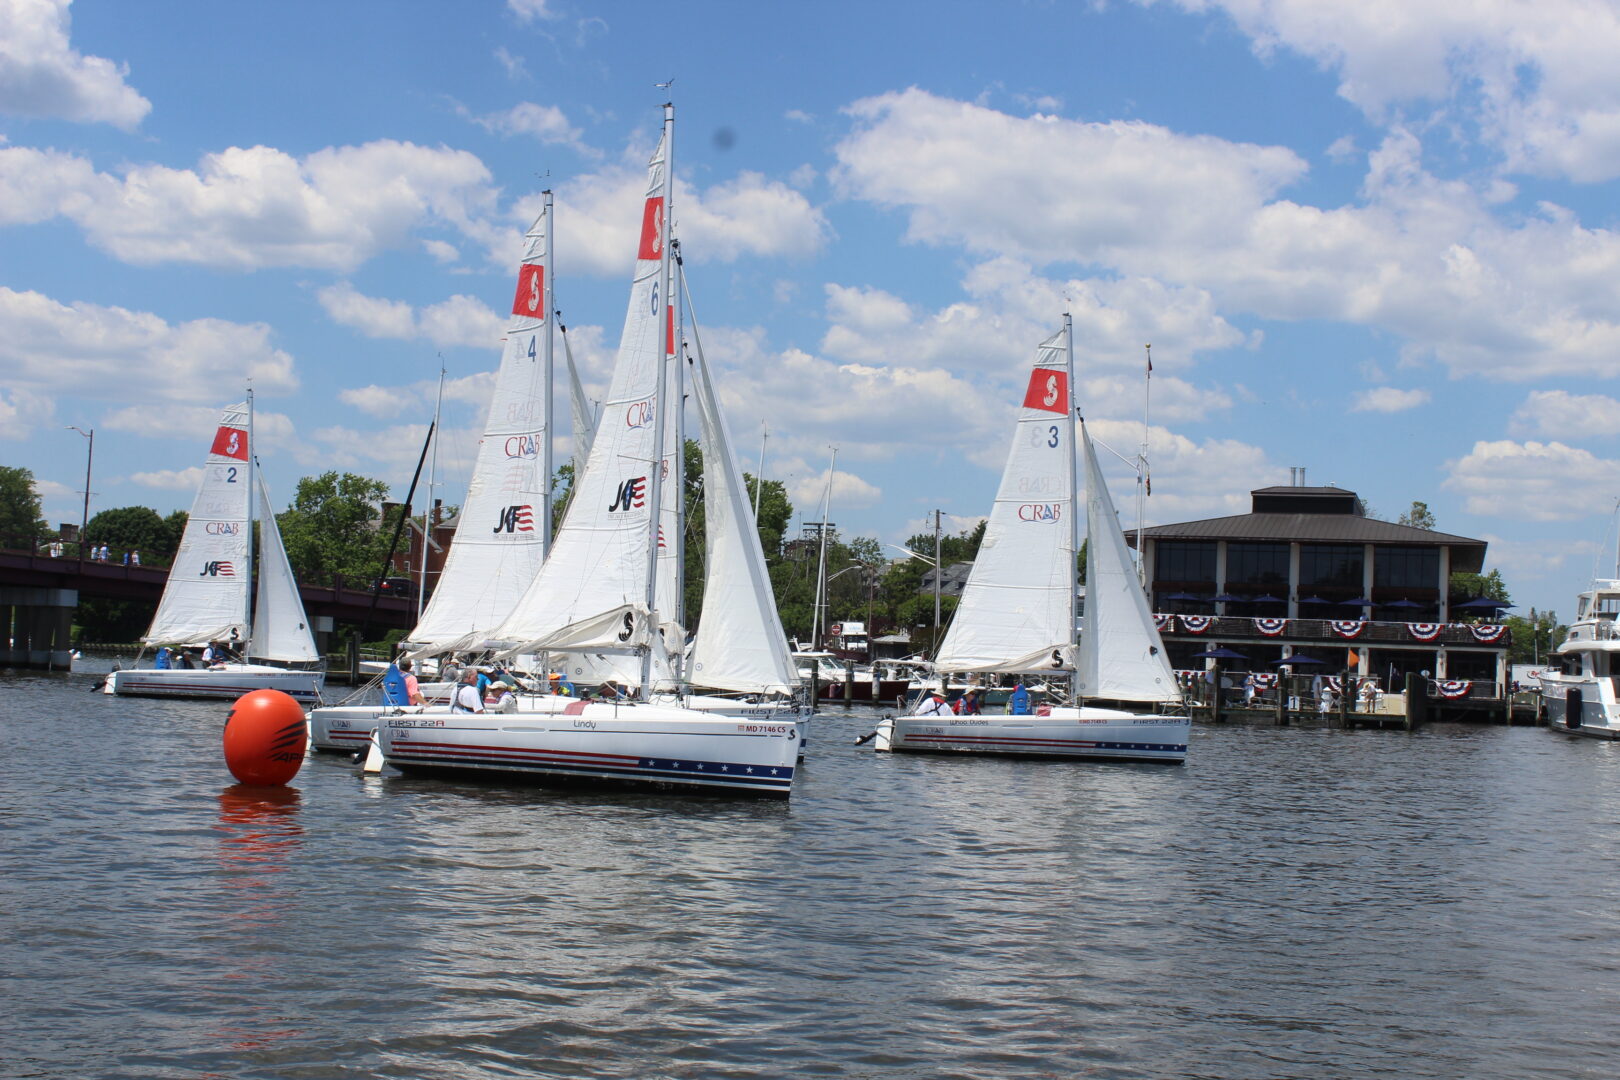 Photo of 4 CRAB sailboats in the fleet on the water. 